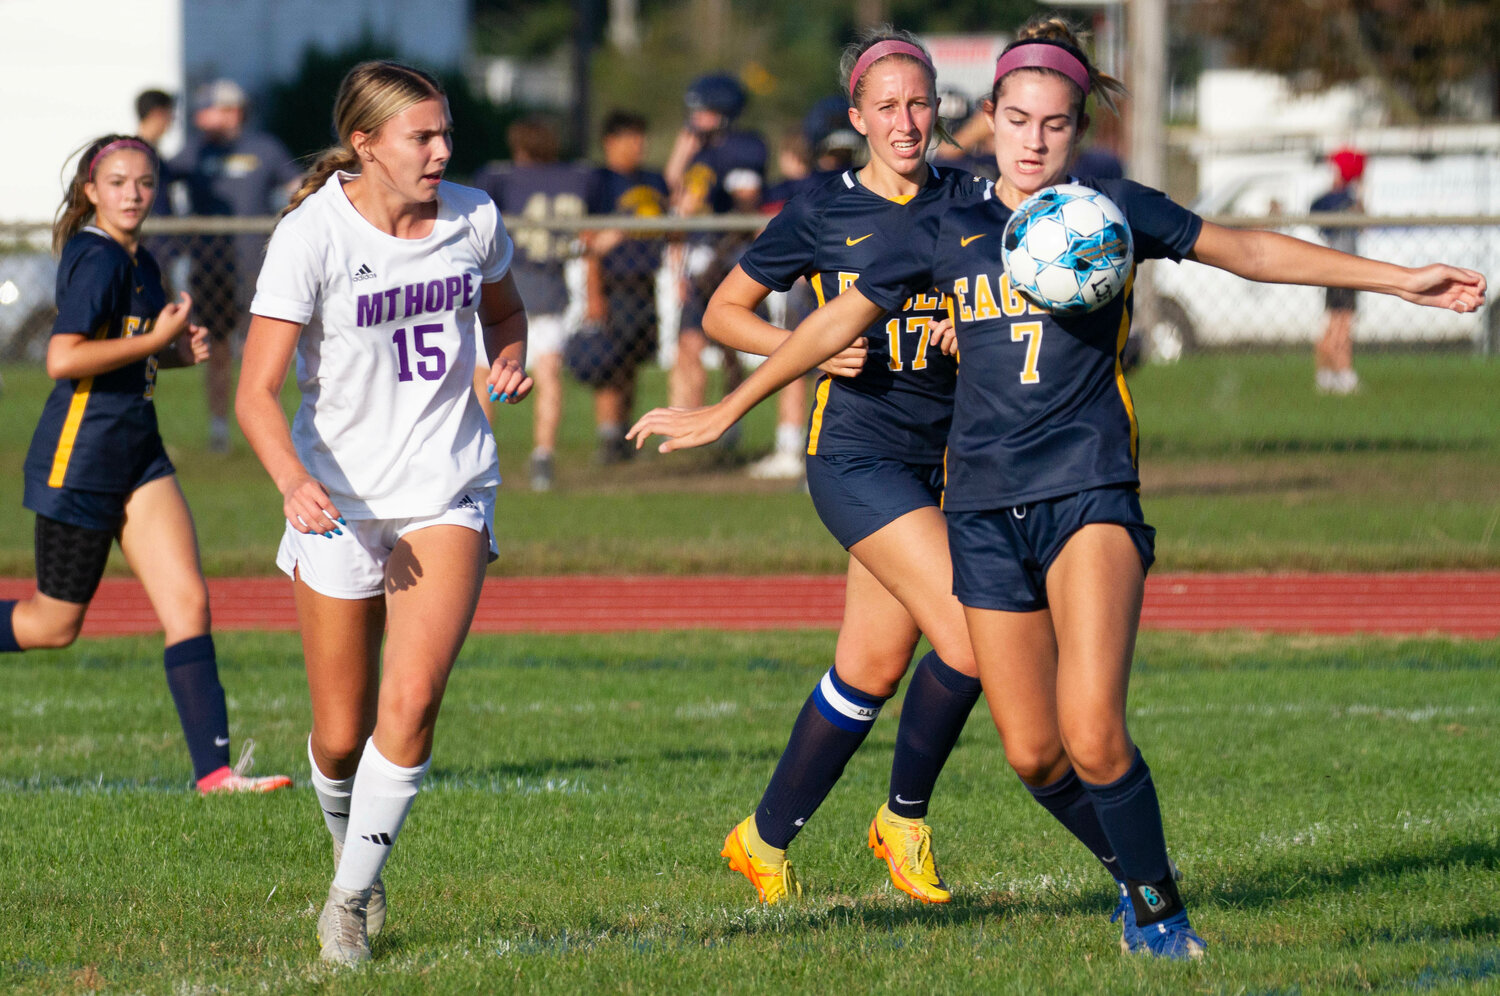 Lilly Swintak (mid-left) looks on as teammate Hannah Carlotto gathers a cross from a teammate.